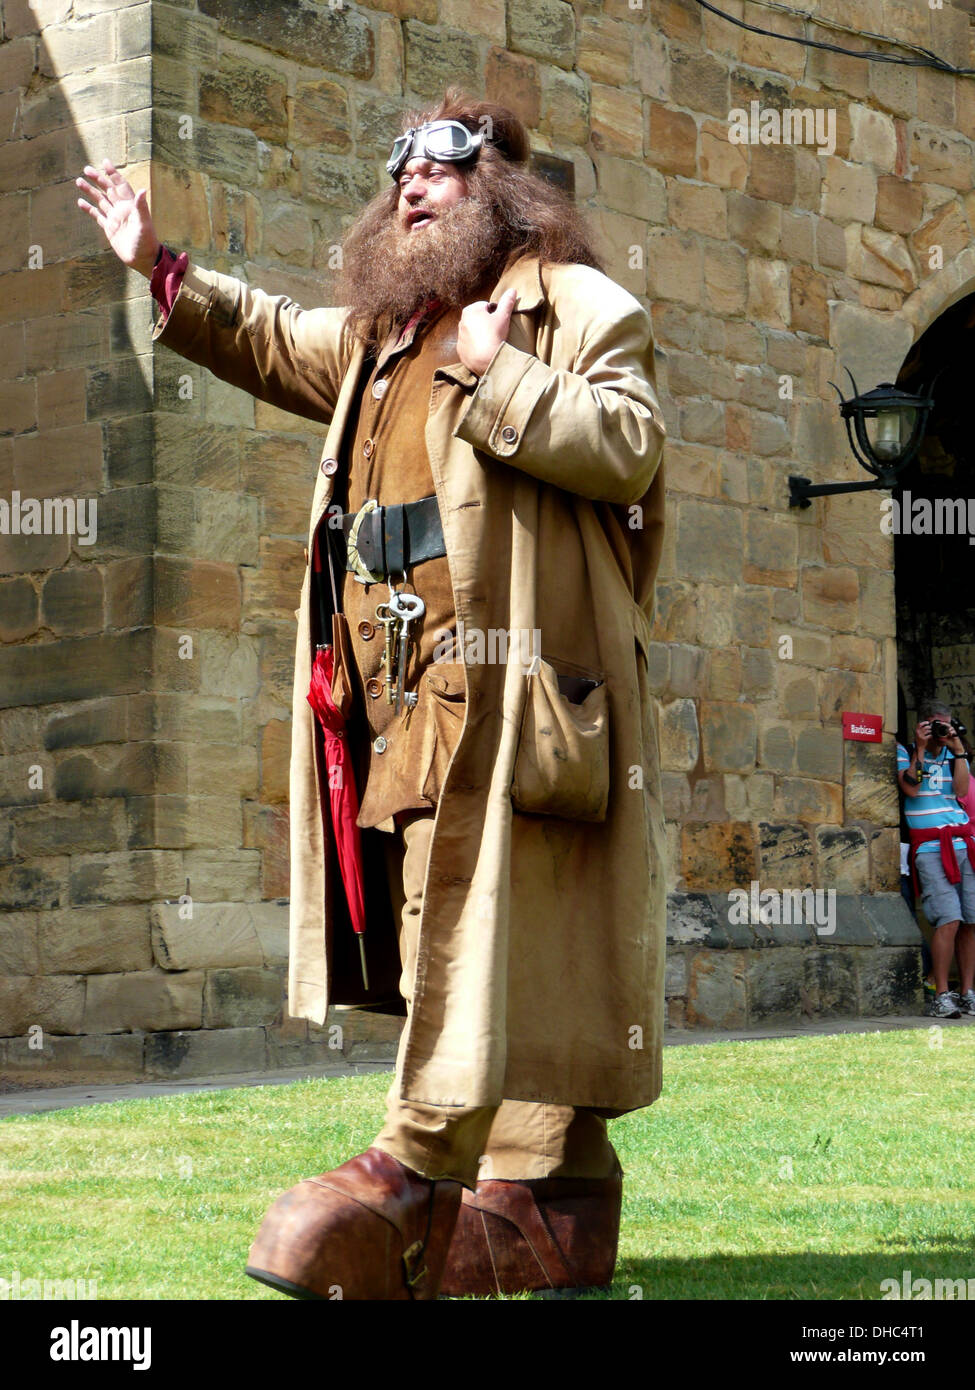 Rubeus Hagrid High Resolution Stock Photography and Images - Alamy